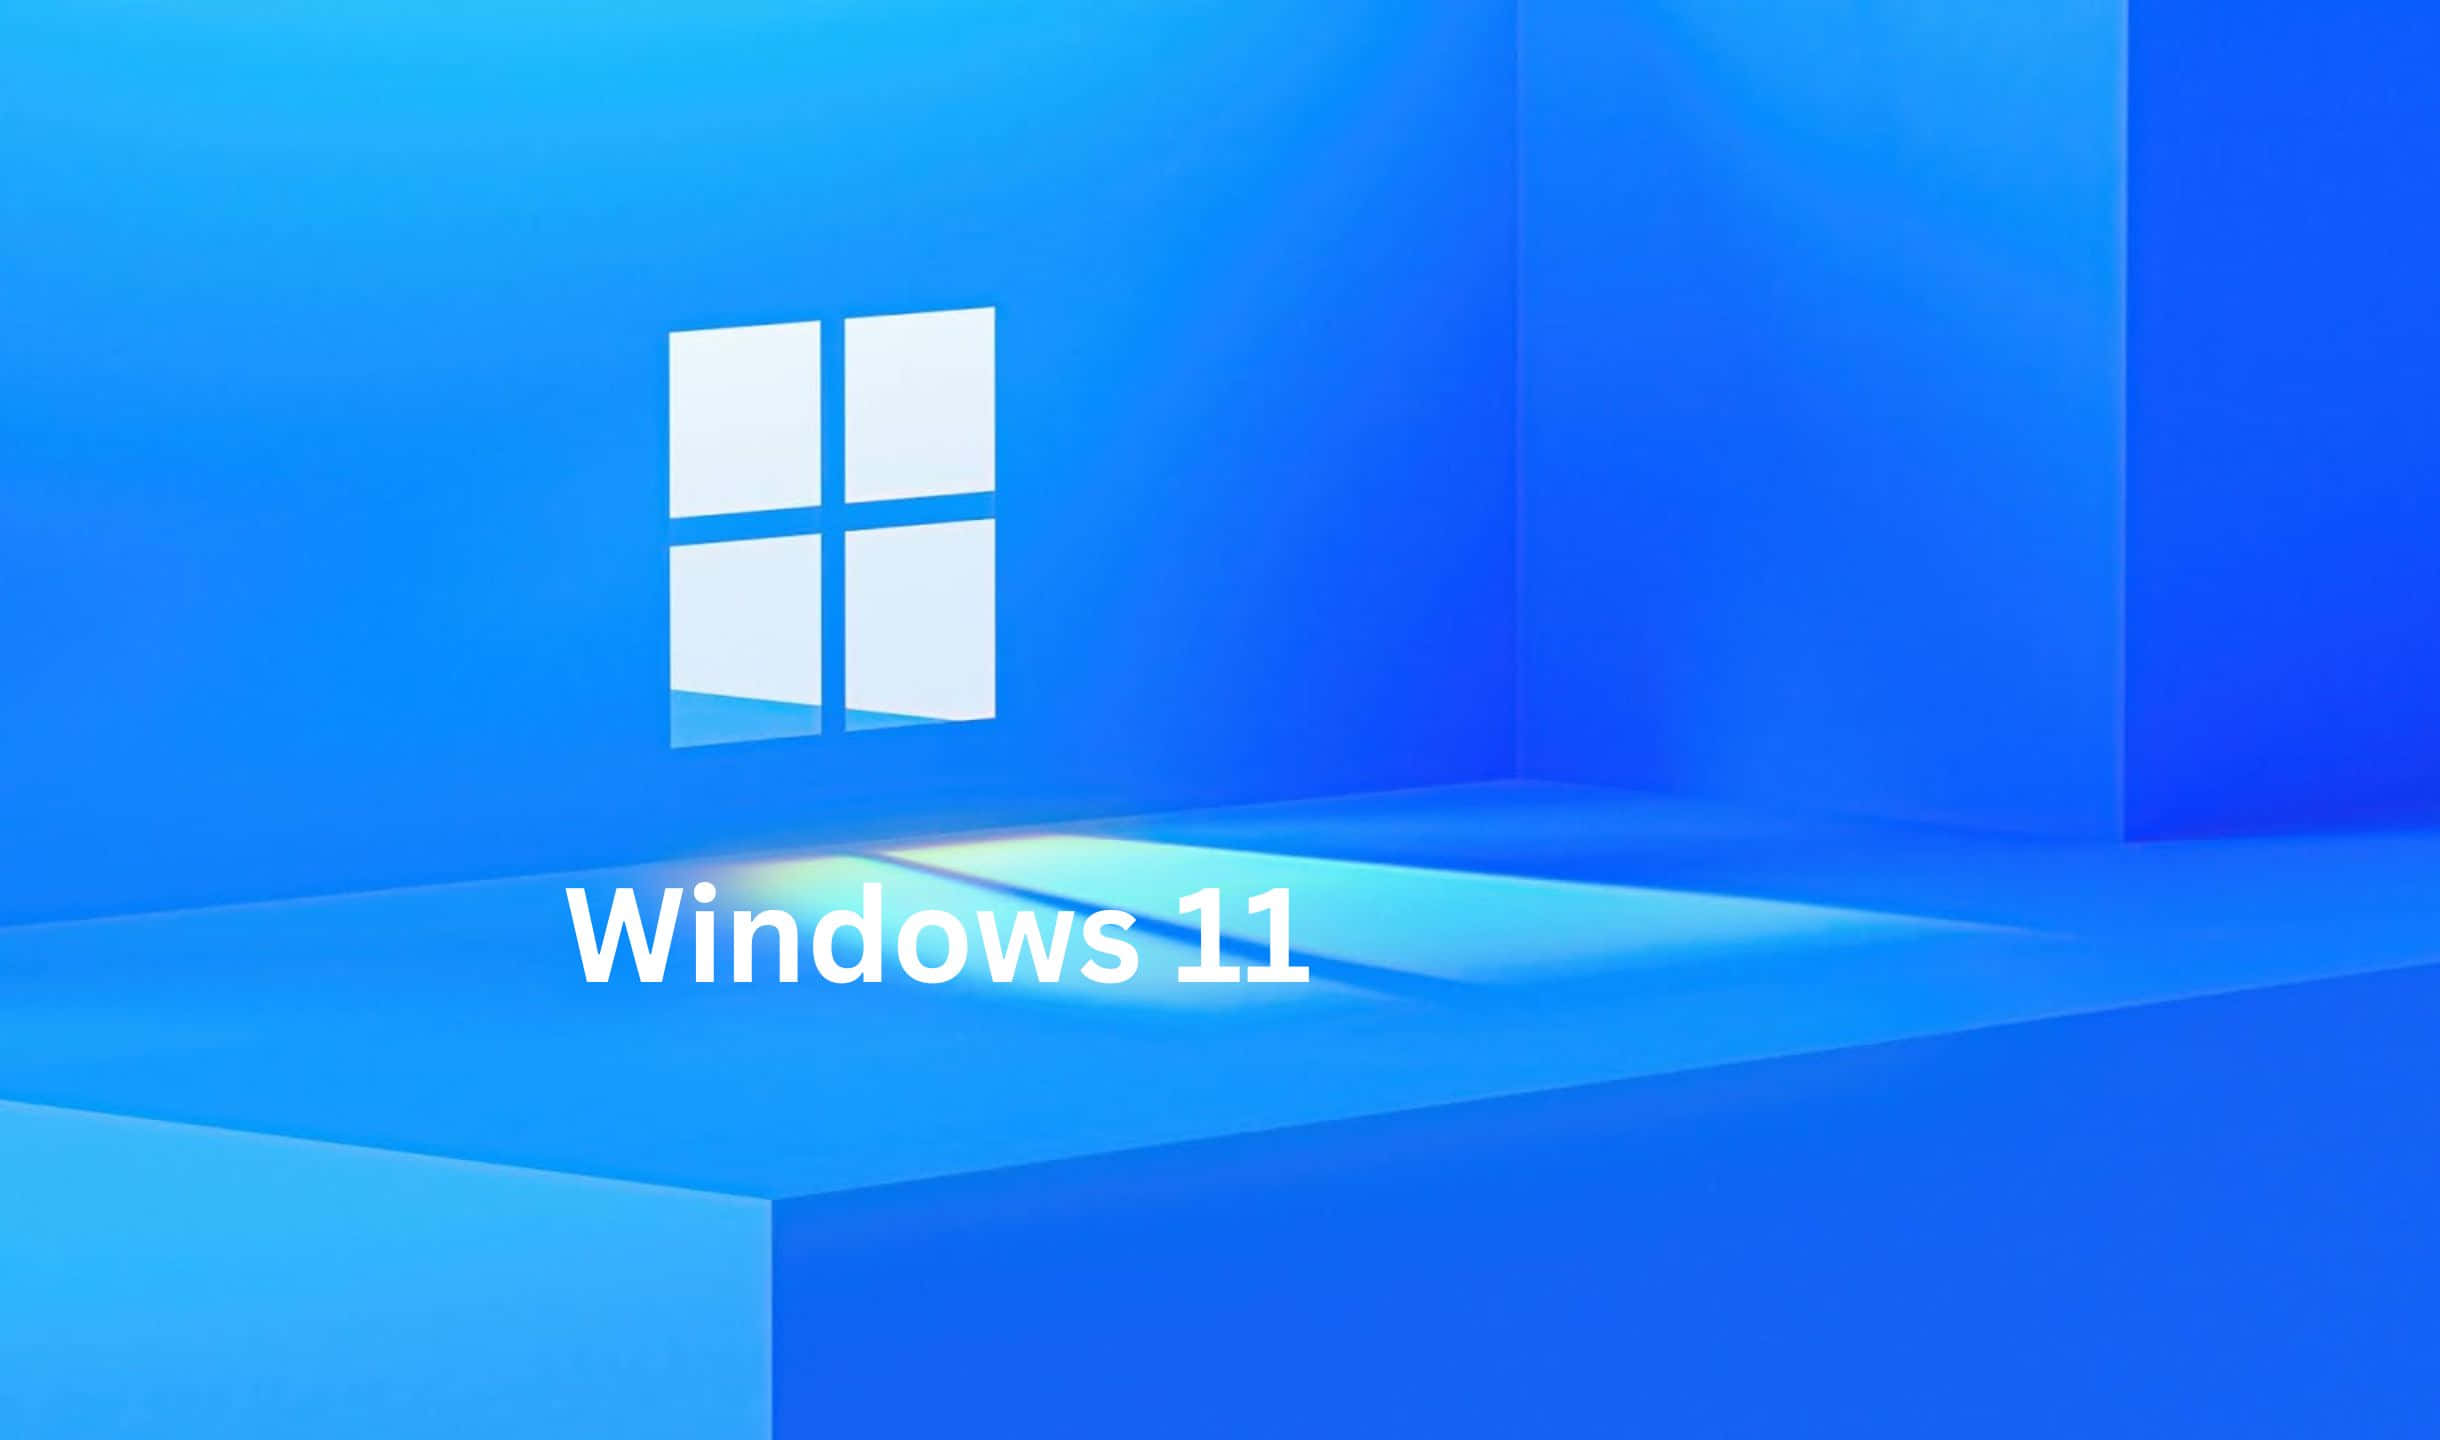 A close look at the sleek new Windows 11 background